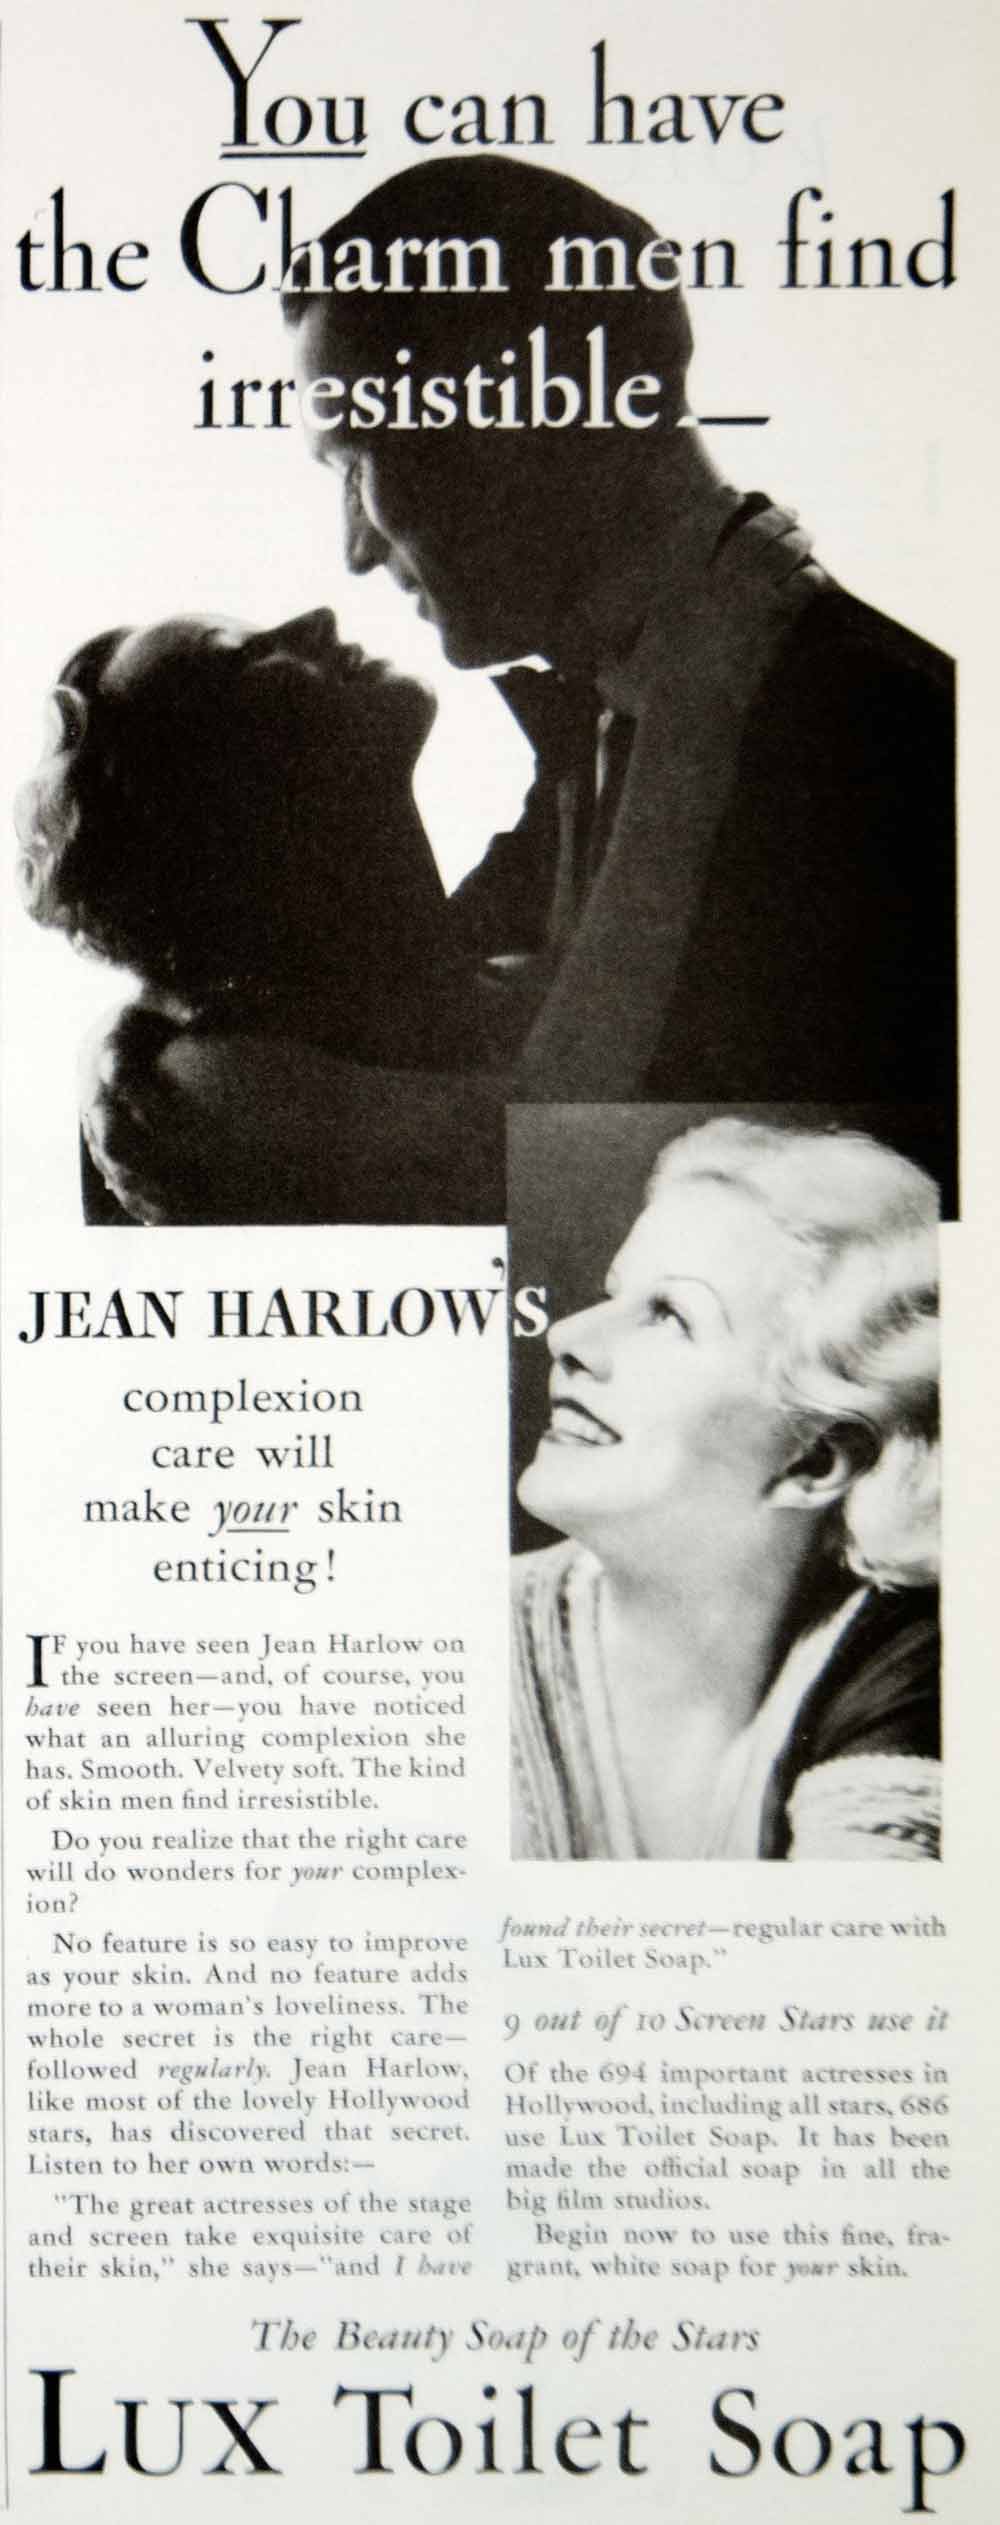 1933 Ad Vintage Lux Toilet Soap Jean Harlow Movie Actress Star Complexion Care